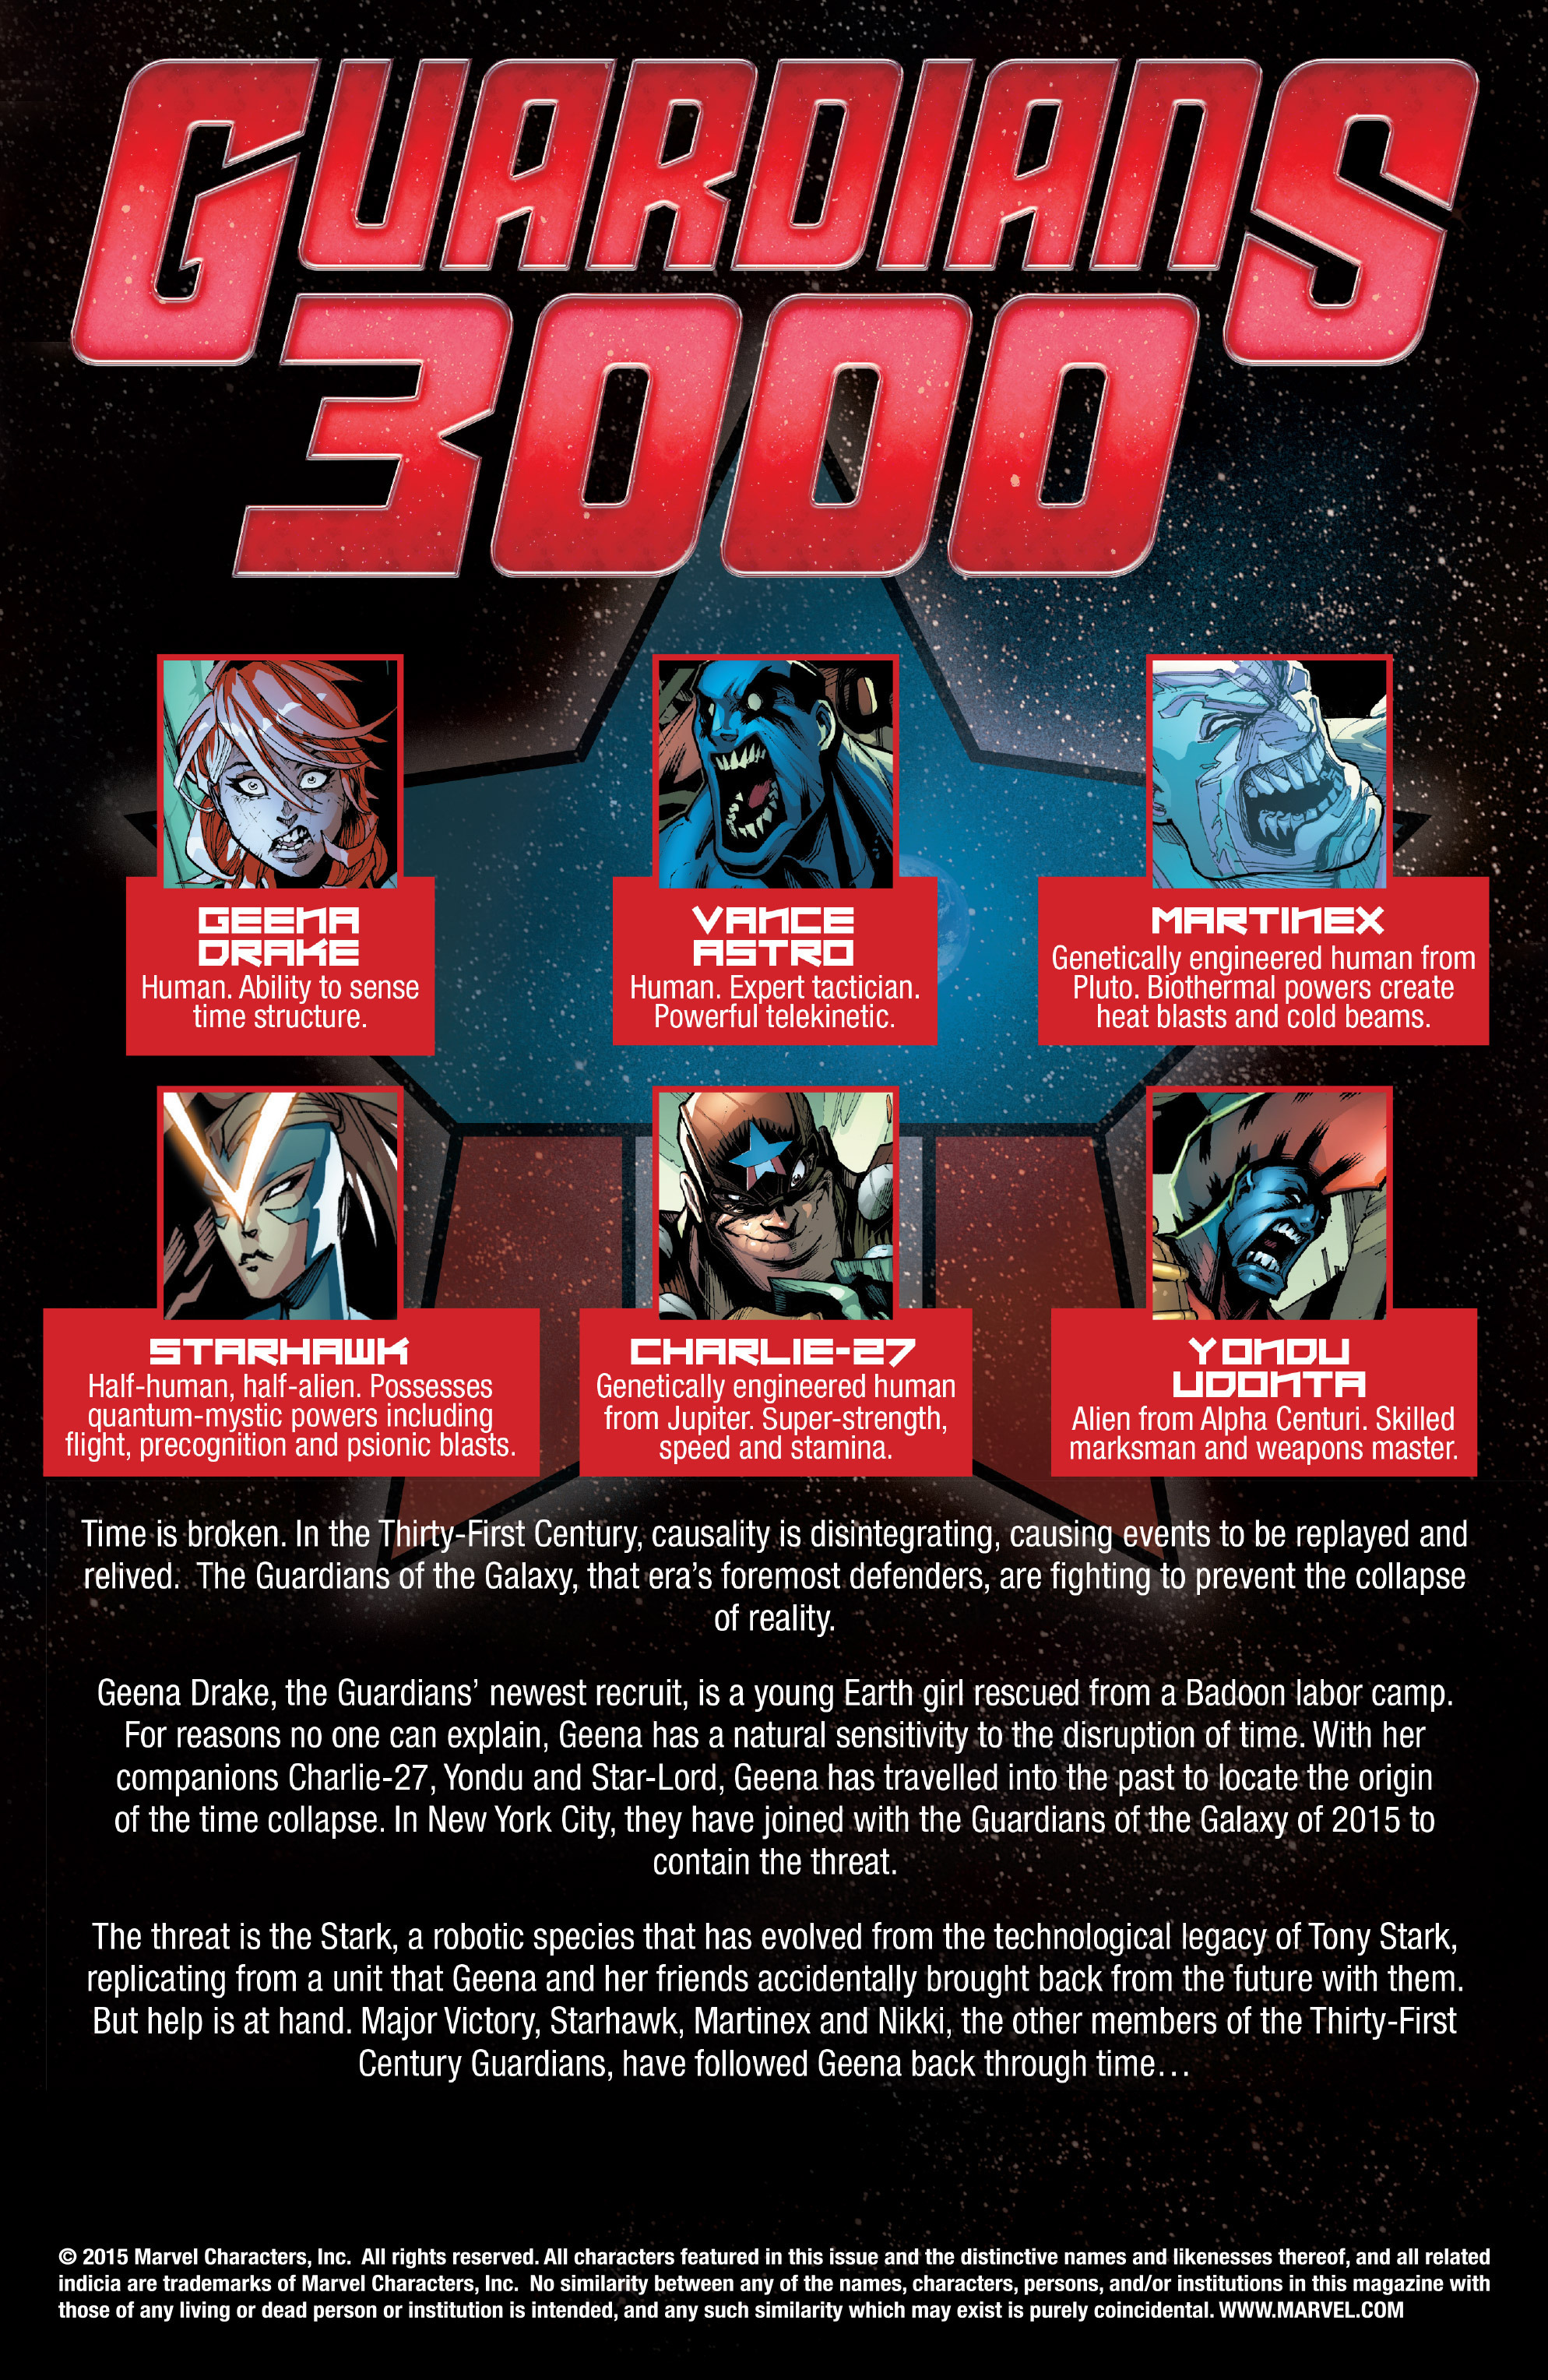 Read online Guardians 3000 comic -  Issue #7 - 2